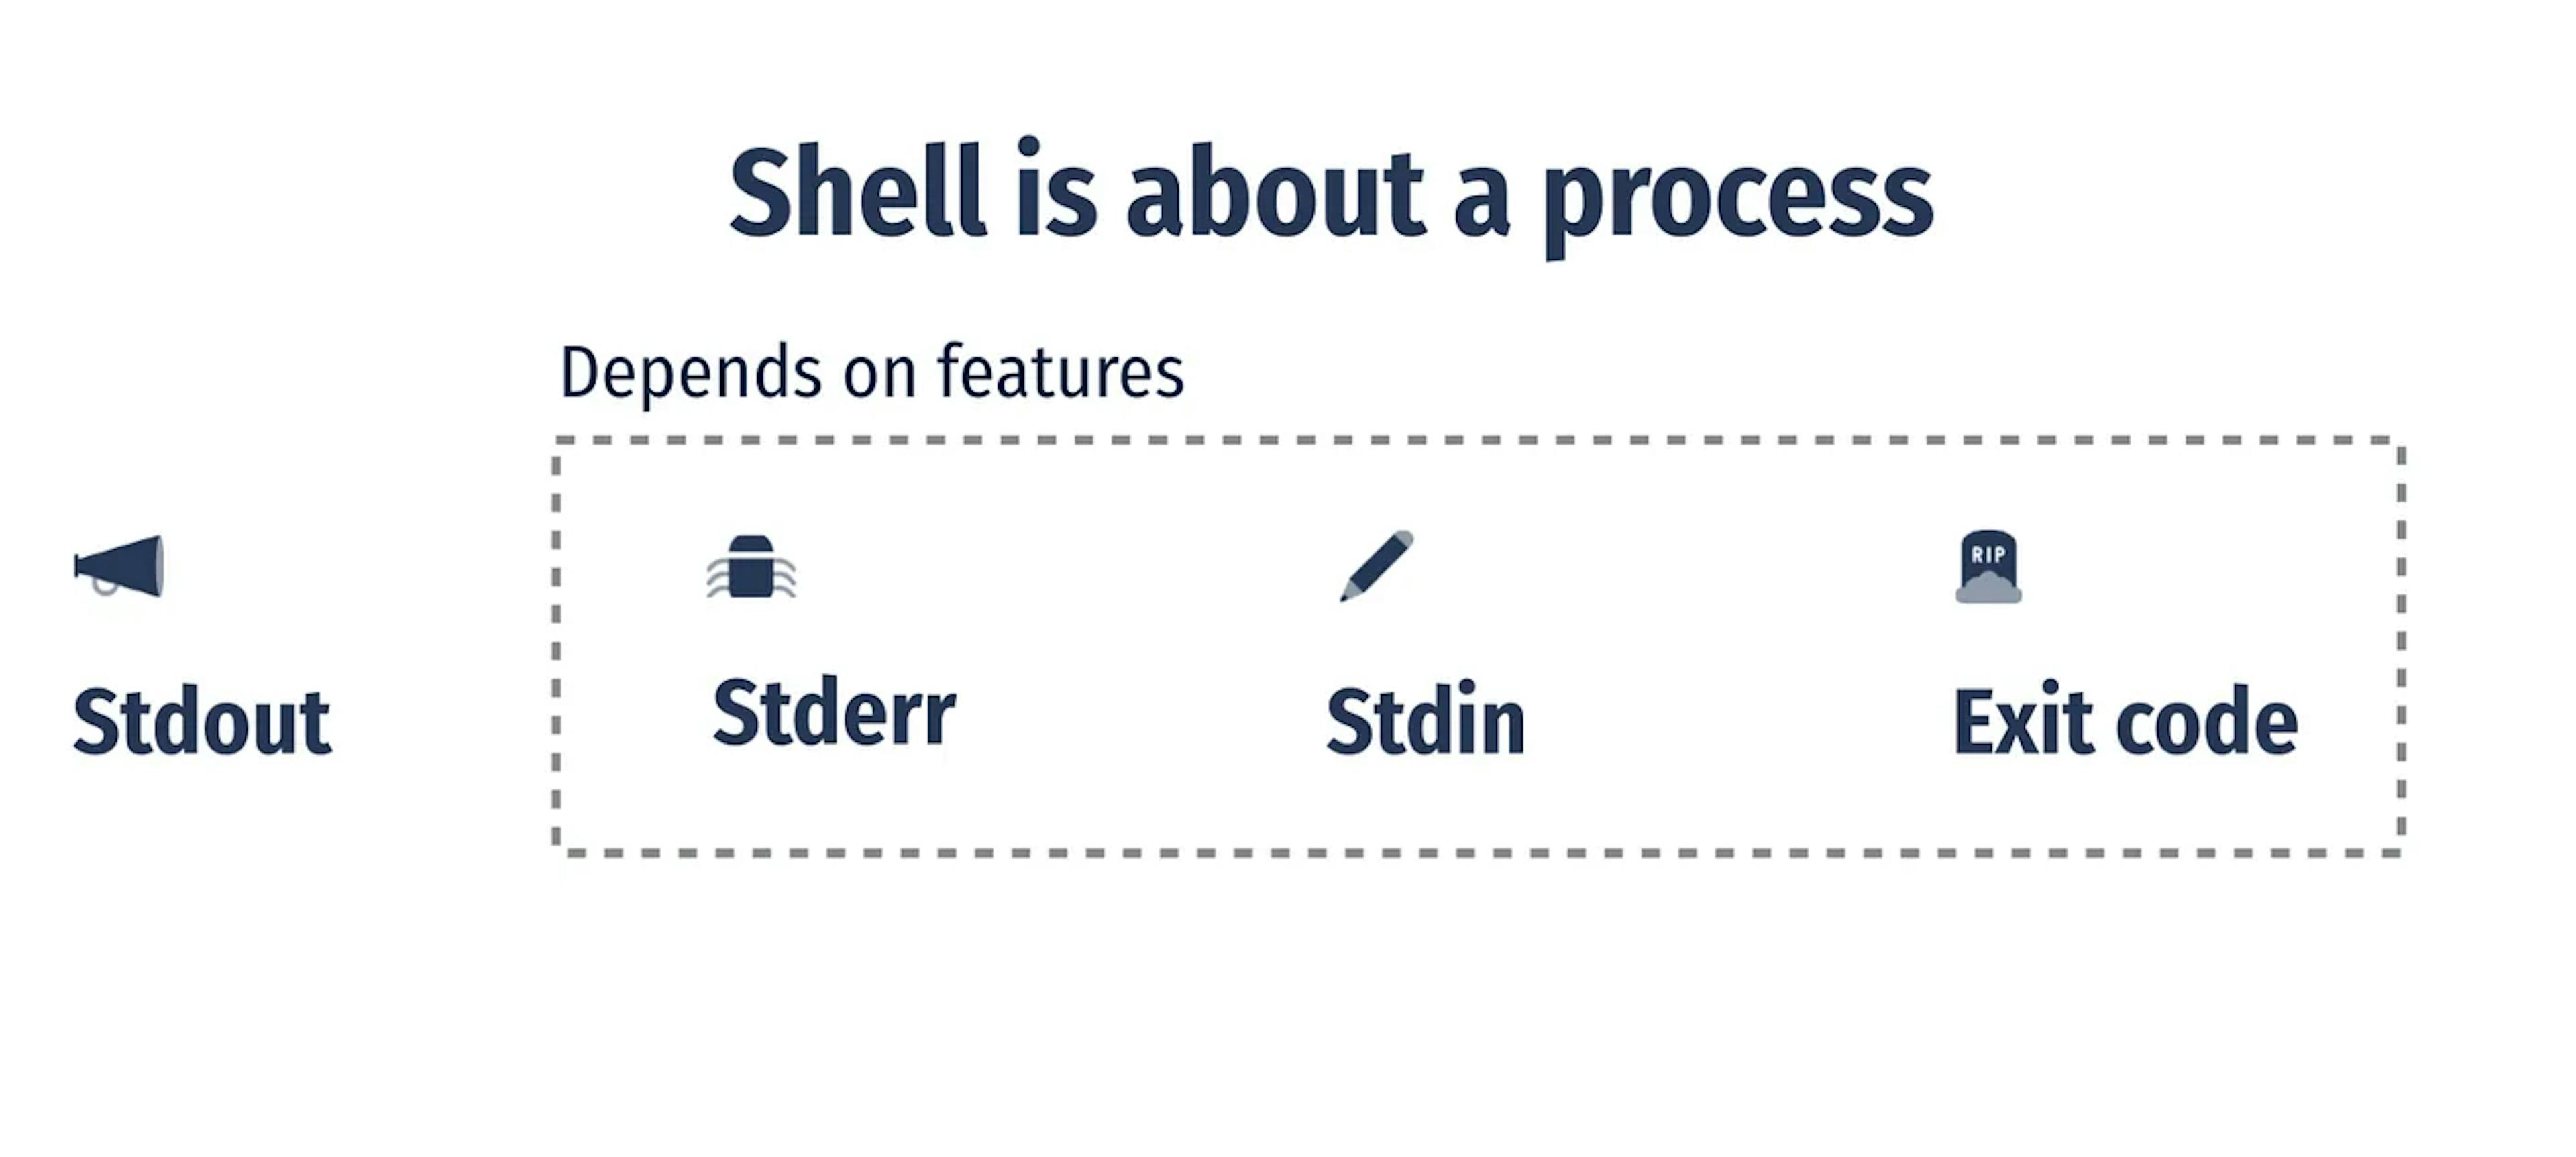 Shell is about a process